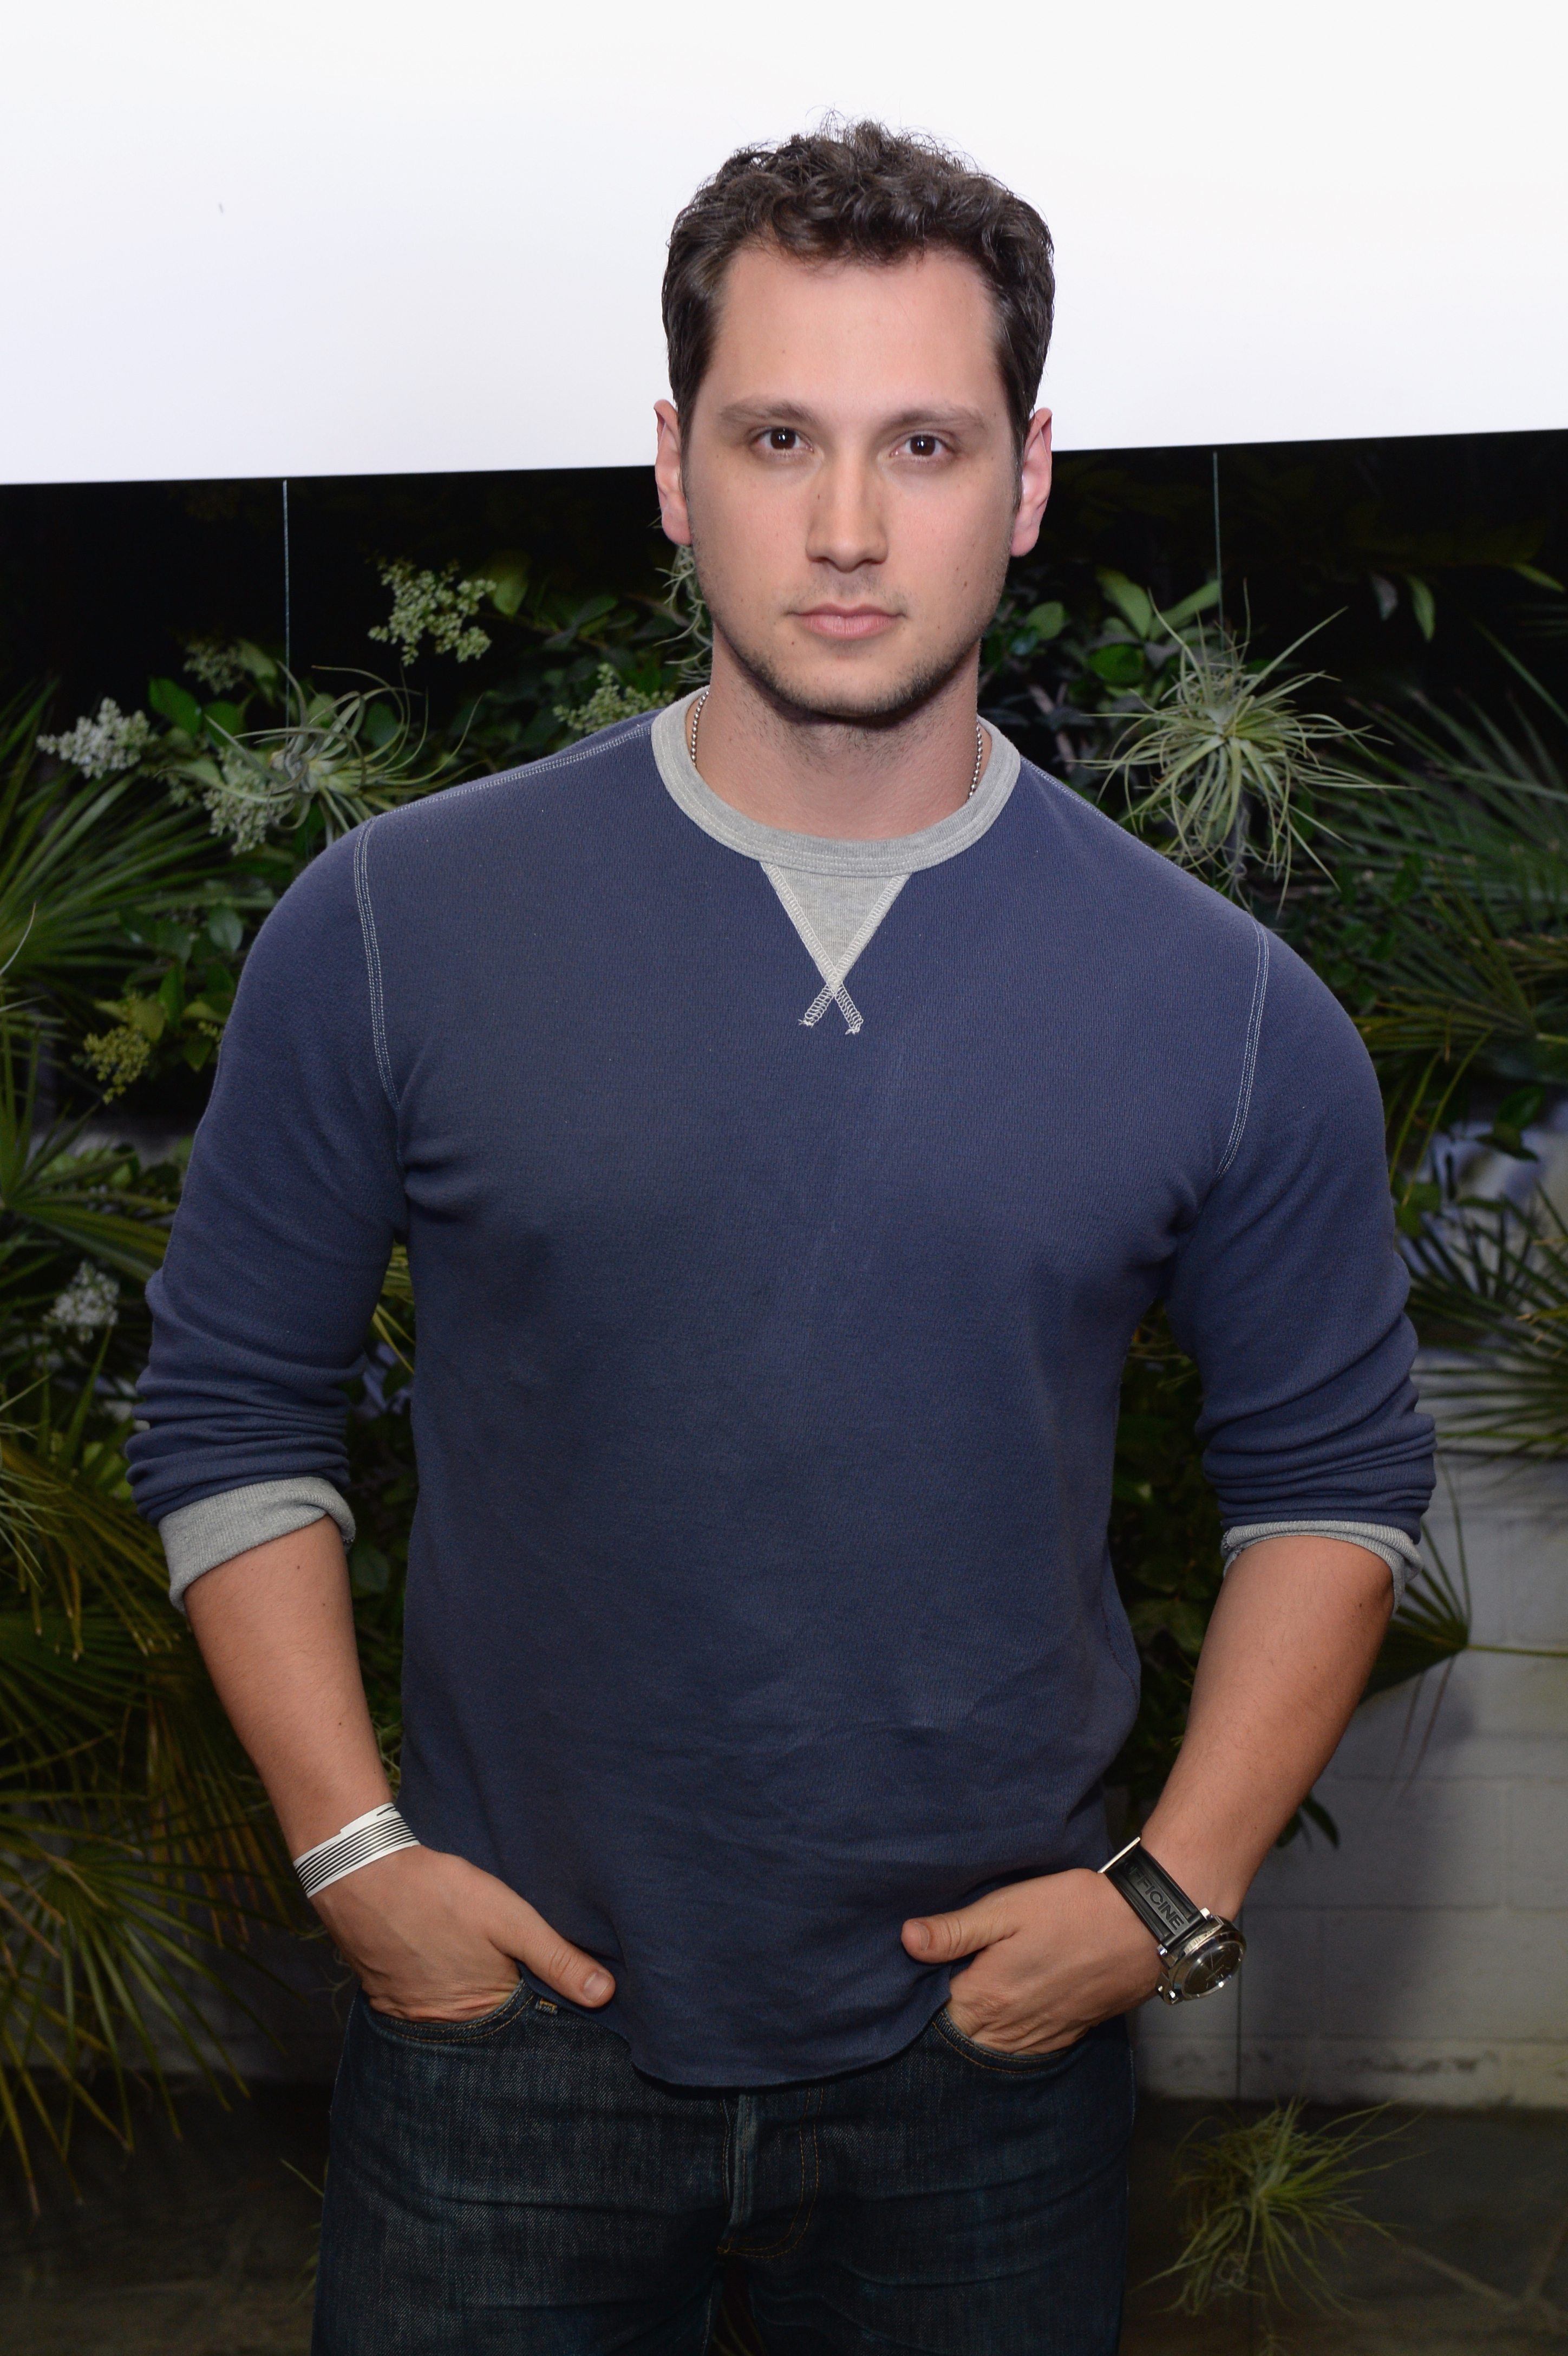 The 38-year old son of father (?) and mother(?) Matt McGorry in 2024 photo. Matt McGorry earned a  million dollar salary - leaving the net worth at 1.5 million in 2024